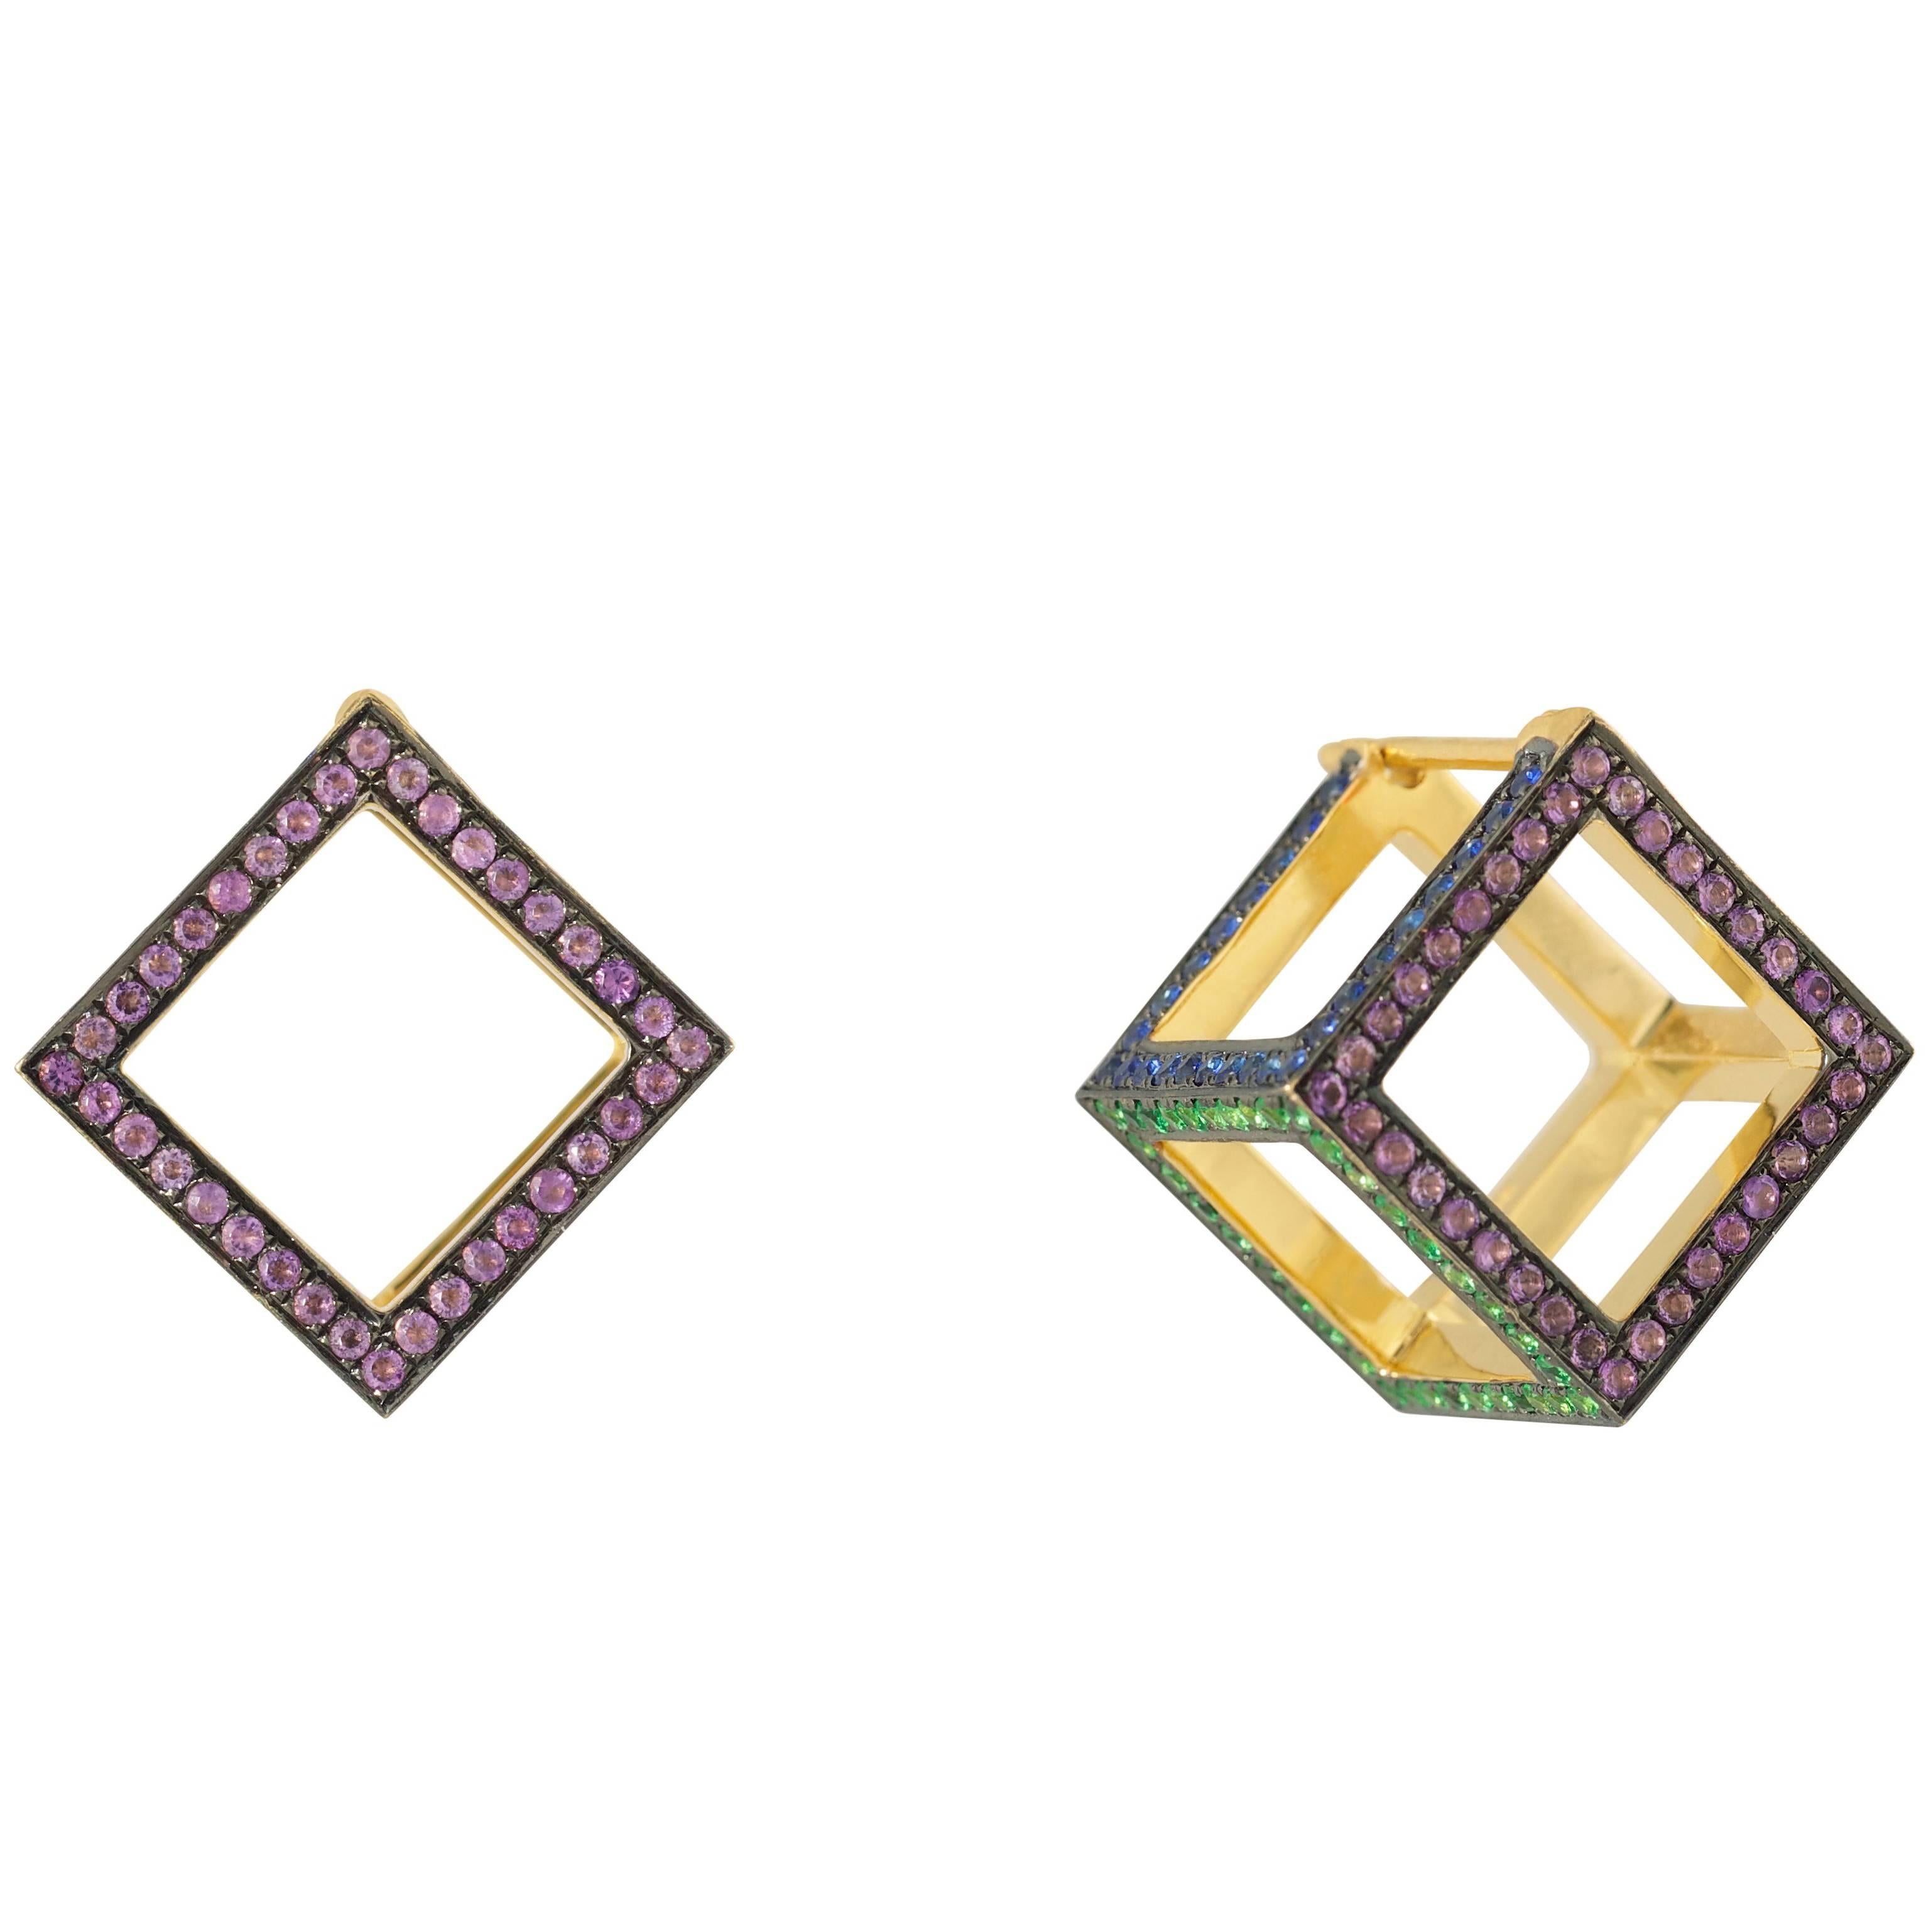 18 Karat Gold Cube Dormeuse “3D” Earrings with Diamonds and Colored Stones